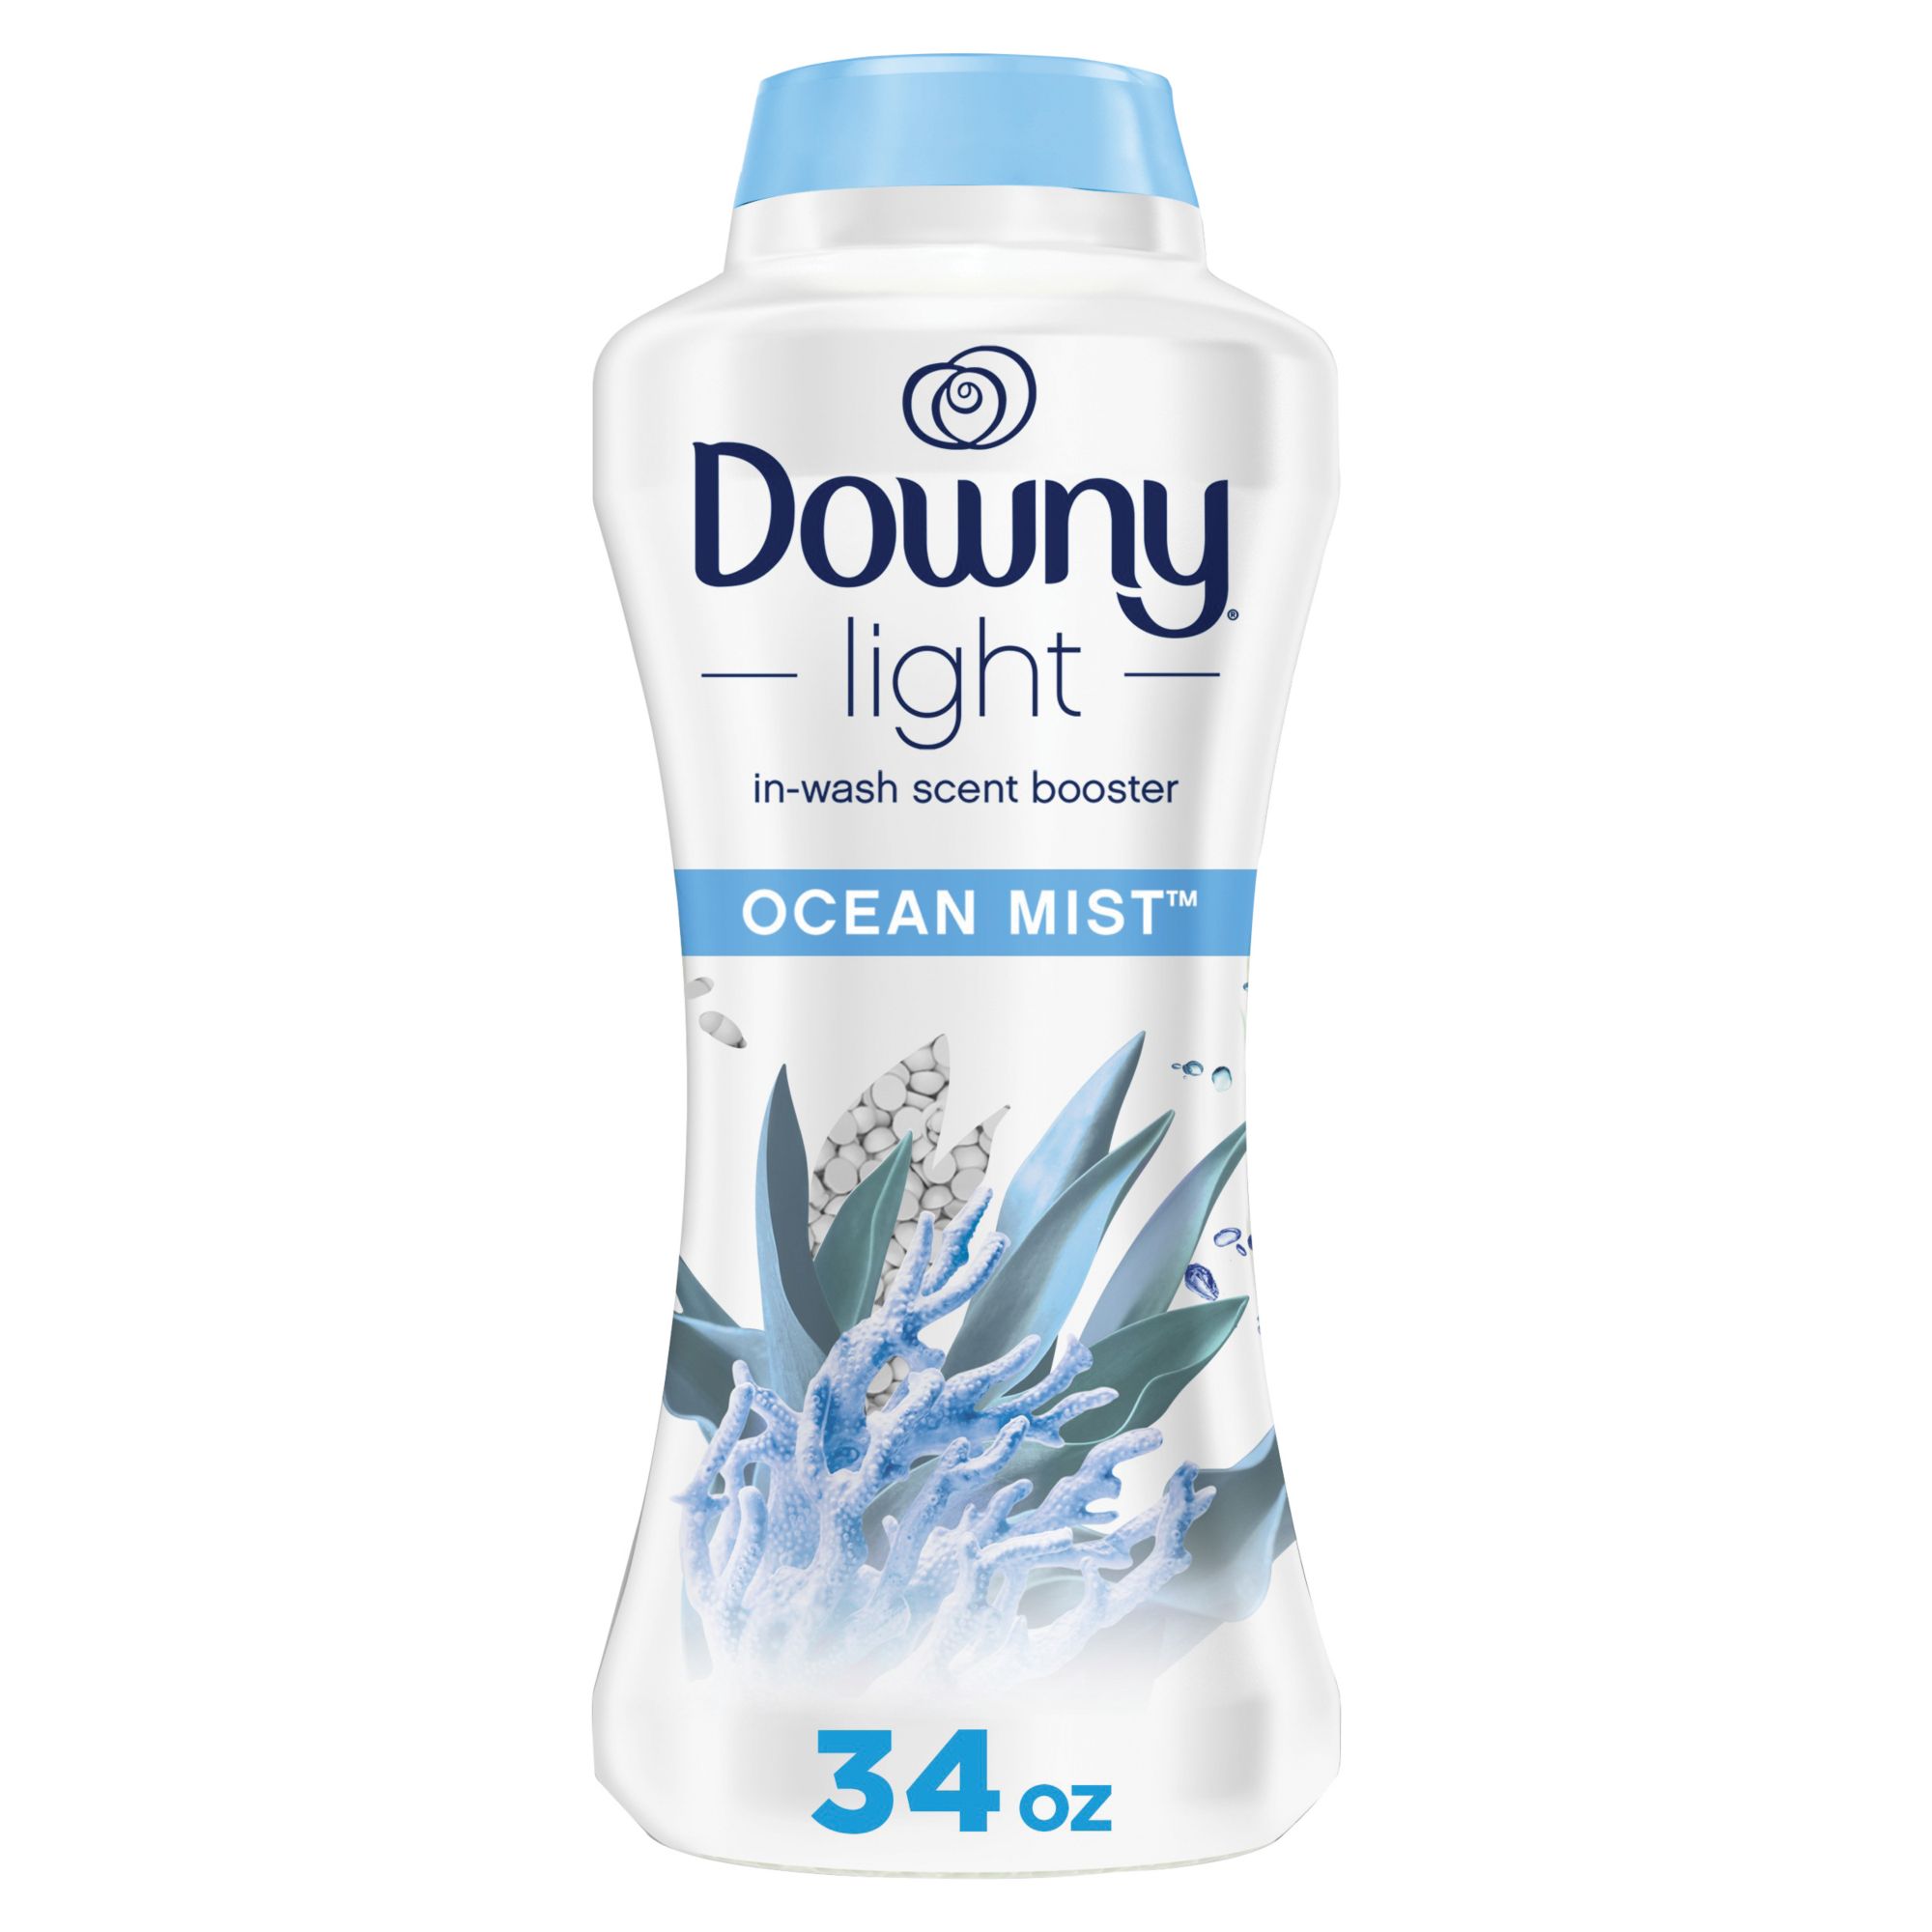 Downy Light Laundry Scent Booster Beads for Washer, 34 oz. - Ocean Mist